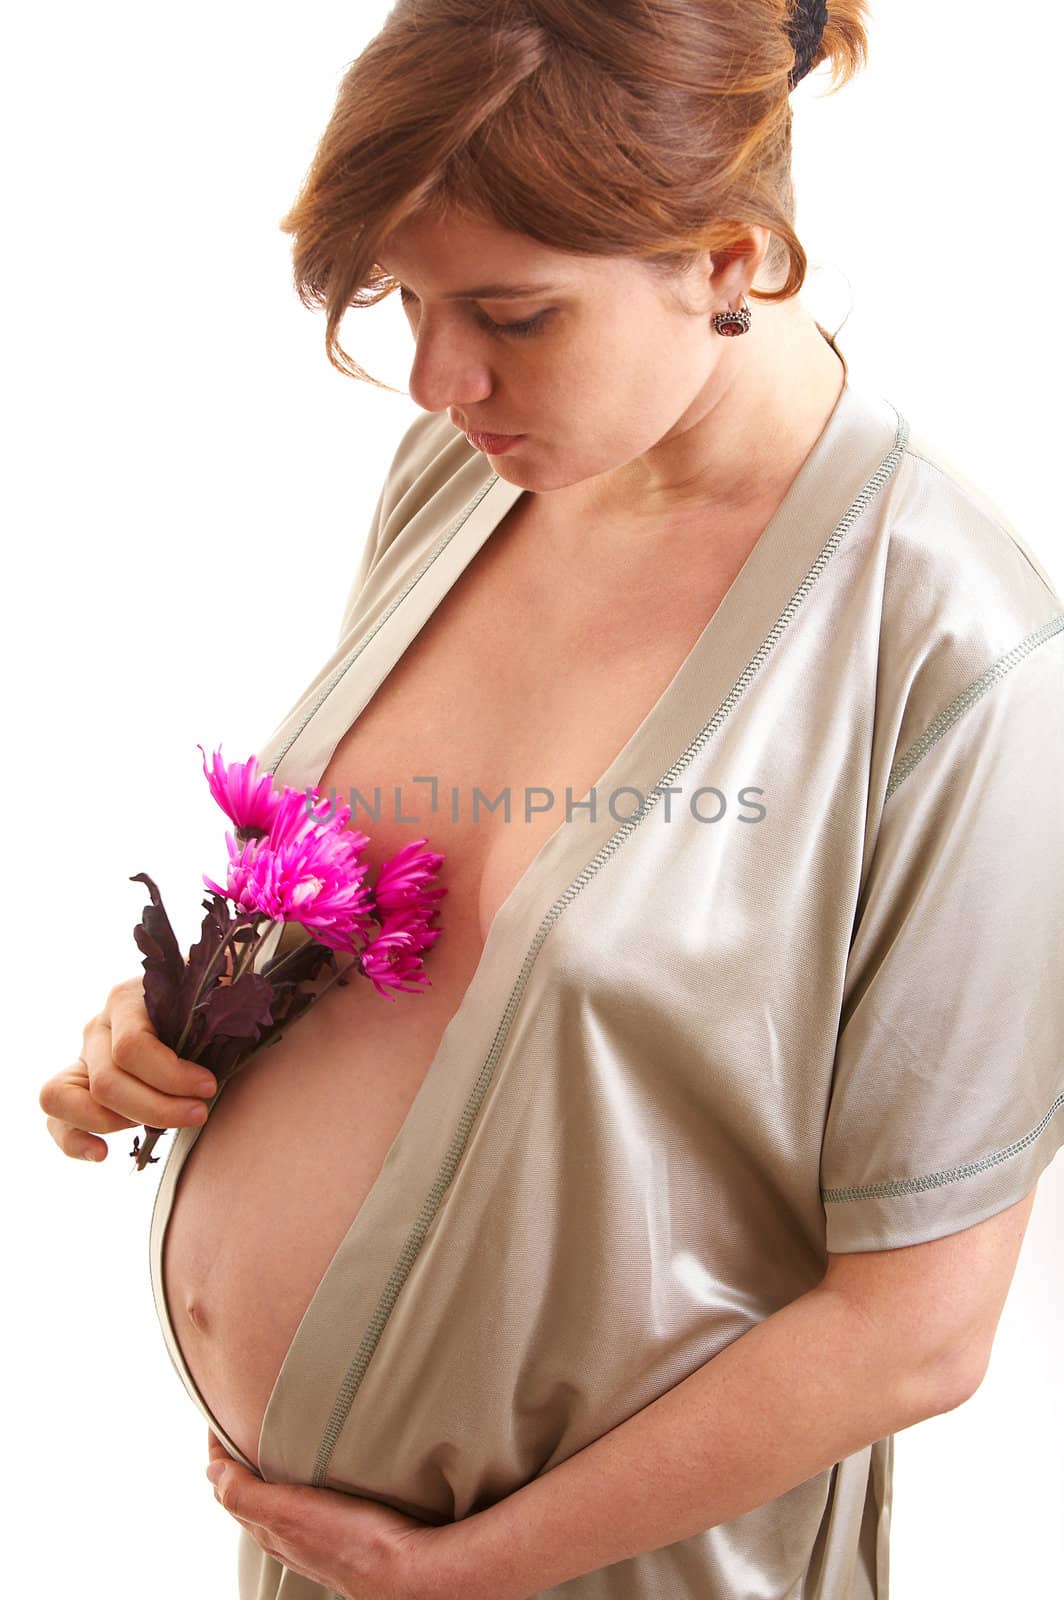 pregnancy woman in the dressing gown with flower